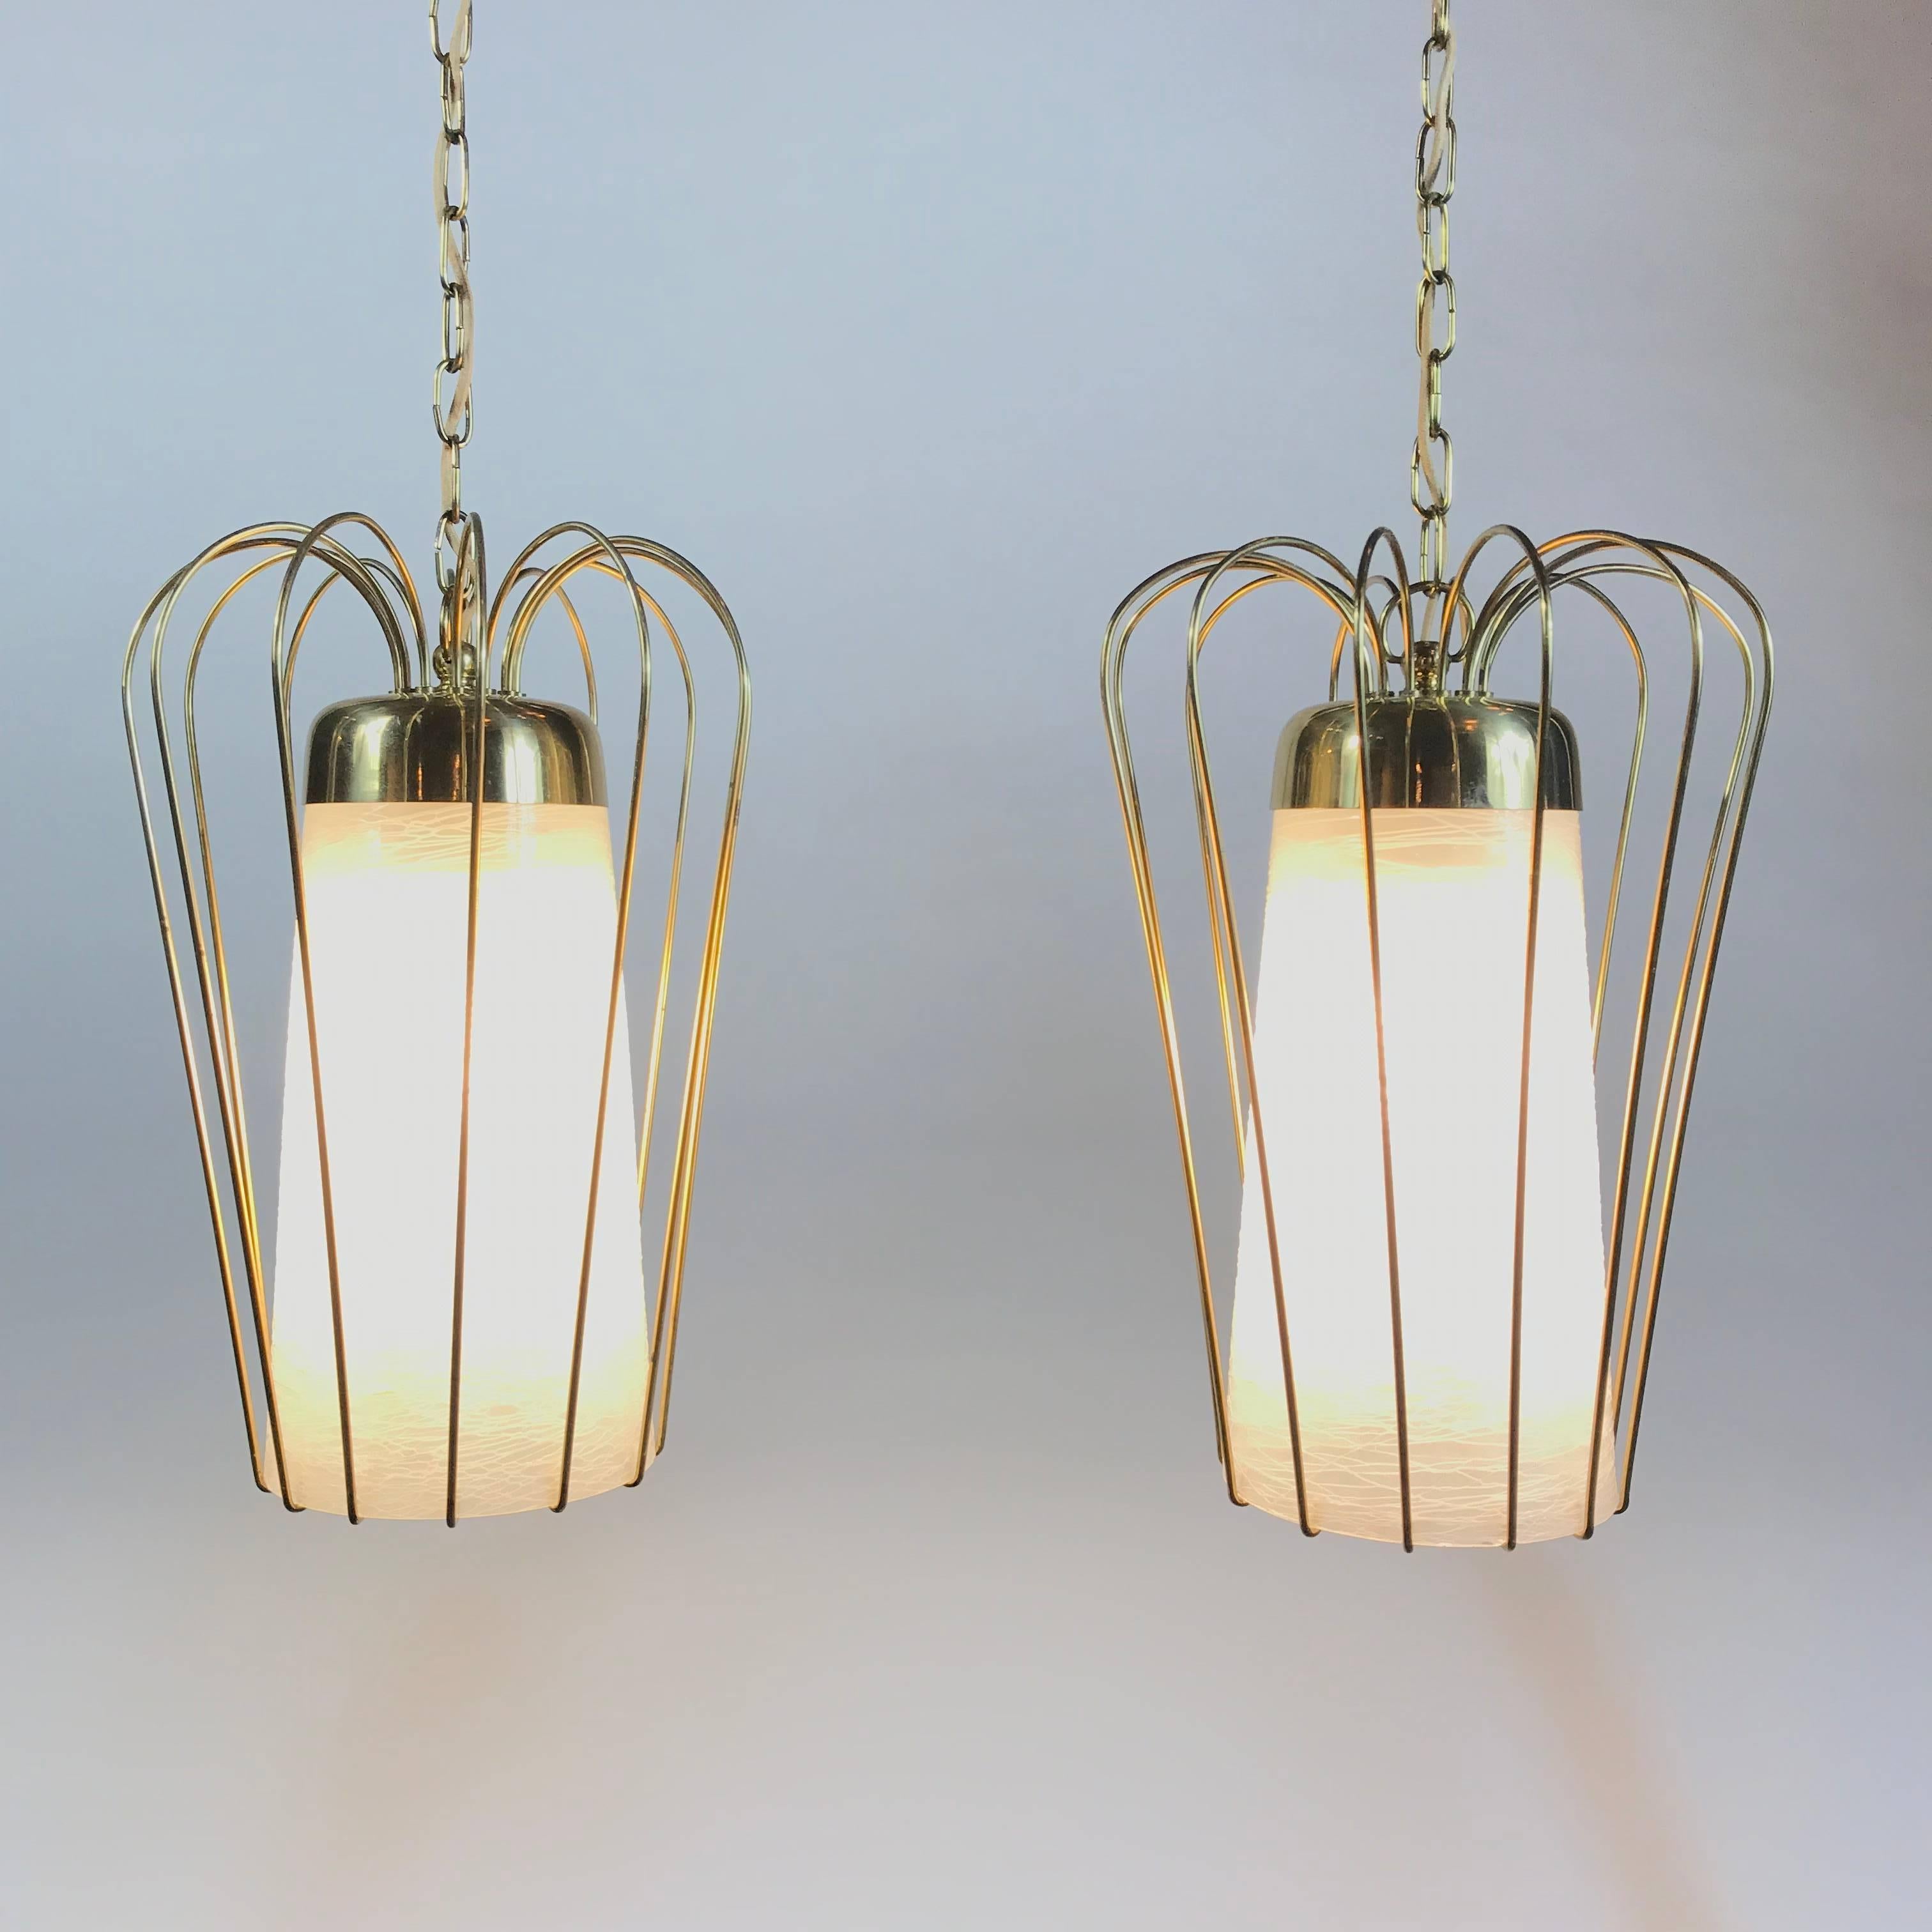 Modernist pendant lamp made by Kalmar in the 1950s. The lamp is made of gilded brass and the lampshade is made of satinated, melted white glass. The lampshade provides a smooth large-area light. 
Fully working and tested condition - E27 socket. Very